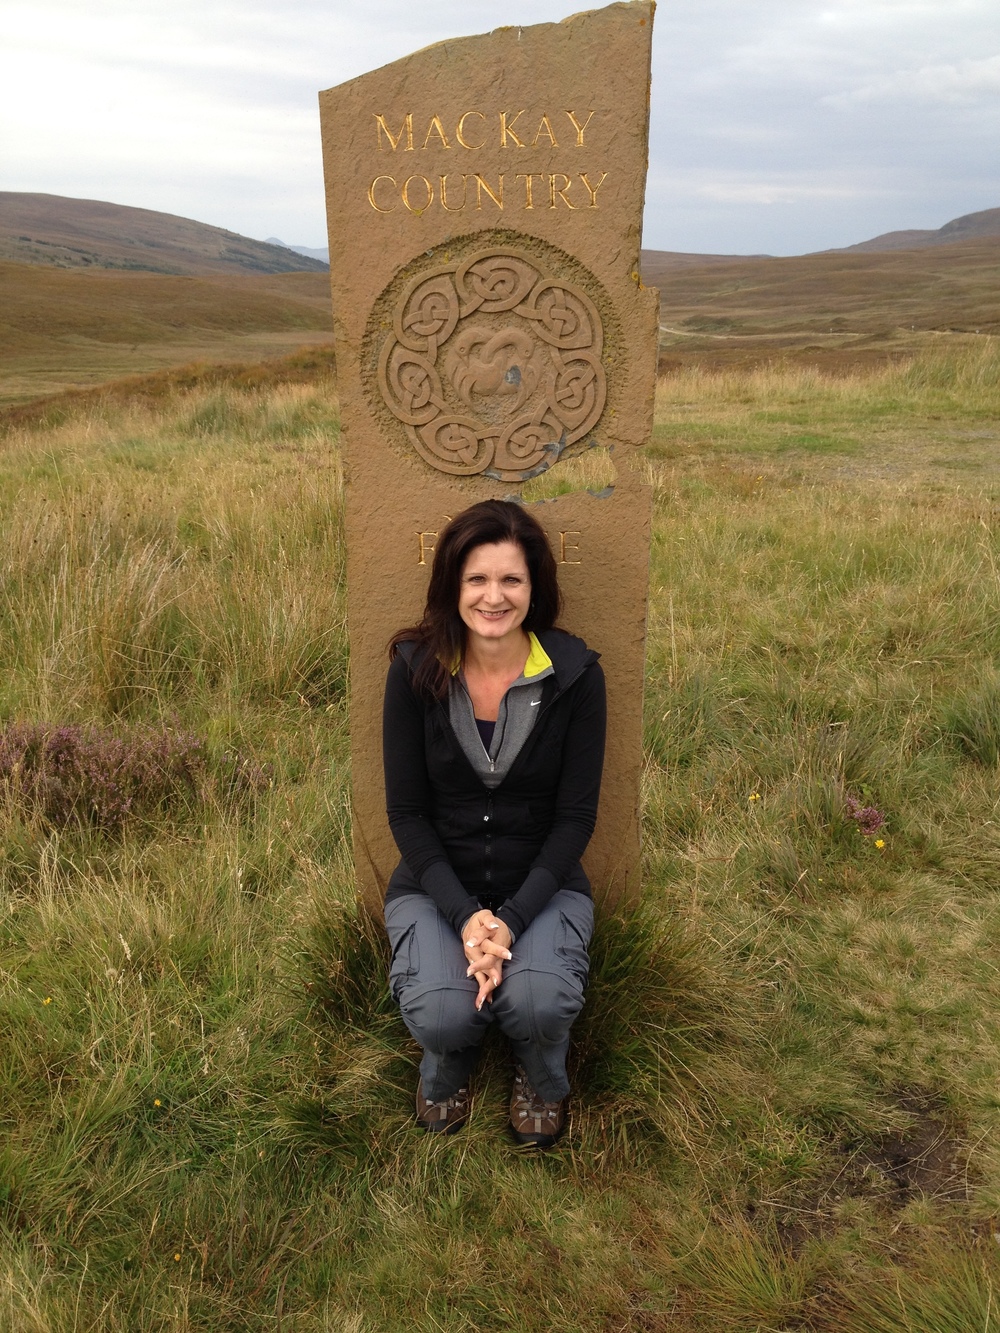 Theresa Mackay doing some ancestral tourism of her own in Scotland. Photo copyright and courtesy Theresa MacKay.